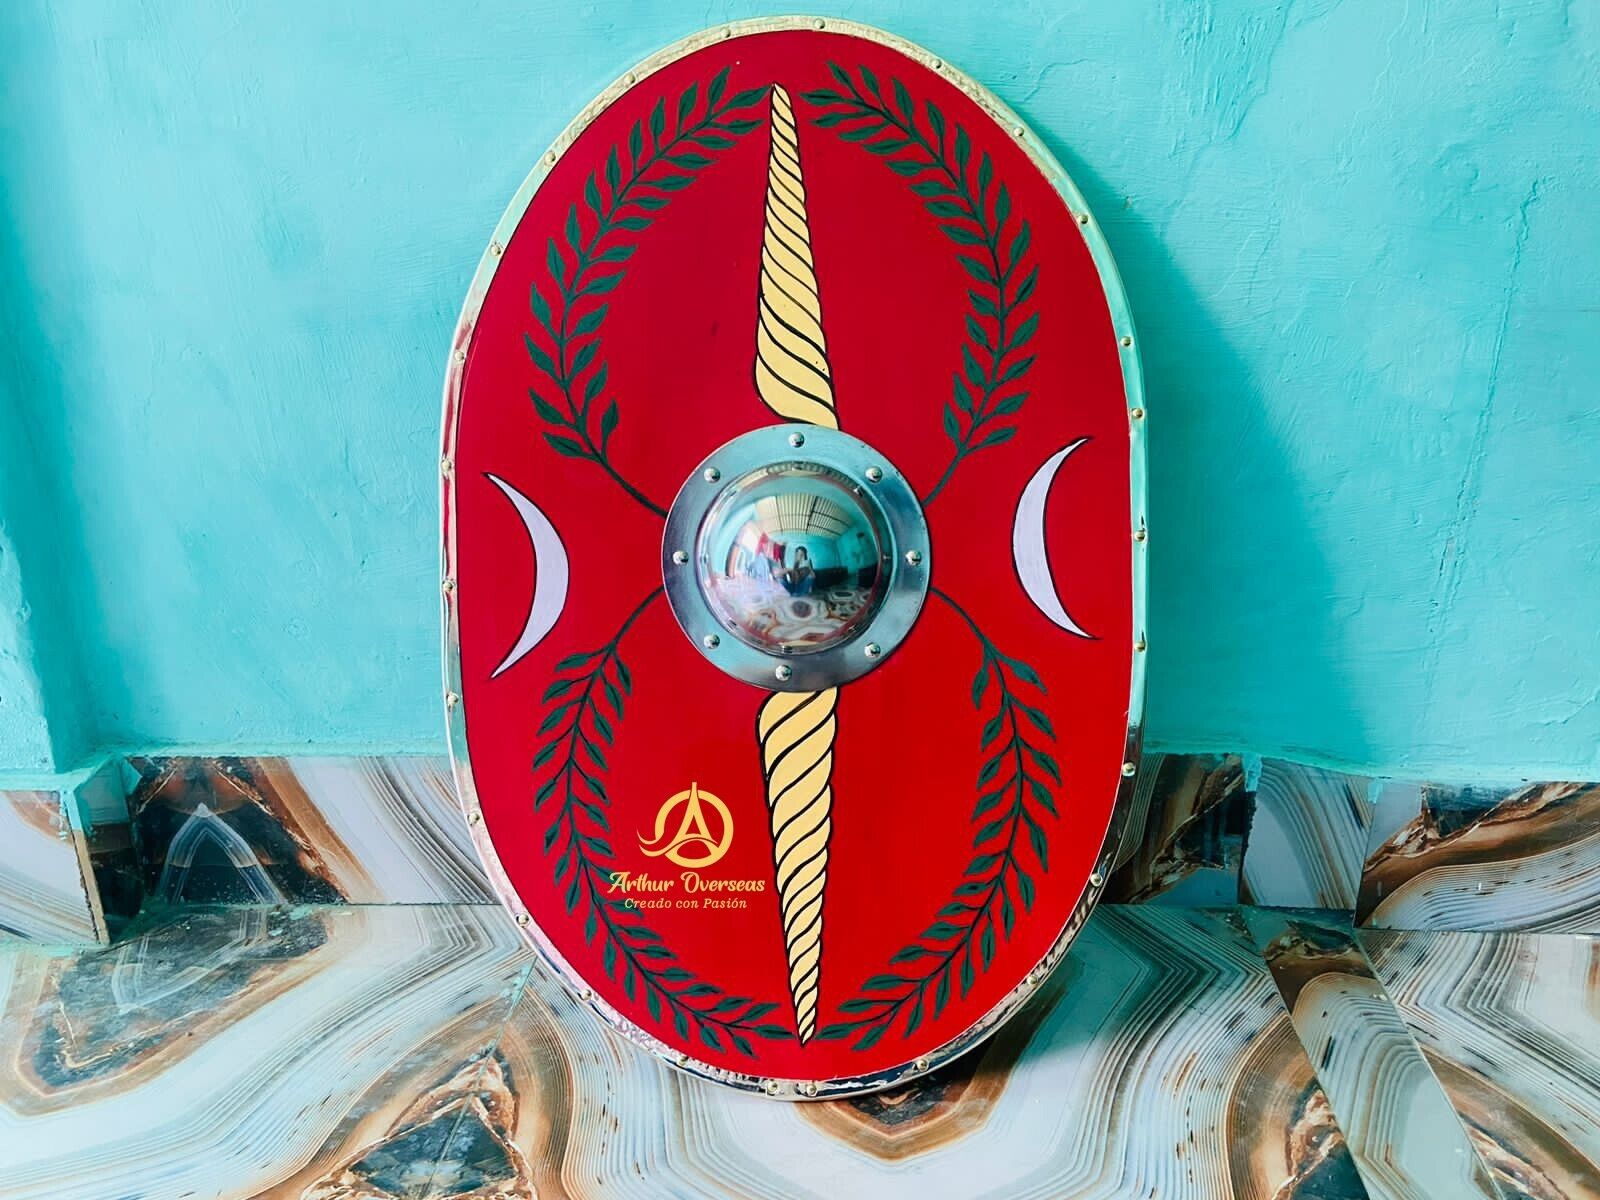 Medieval Roman Oval Shield Red Armor Shield Fully Functional Roman Scutum Red.